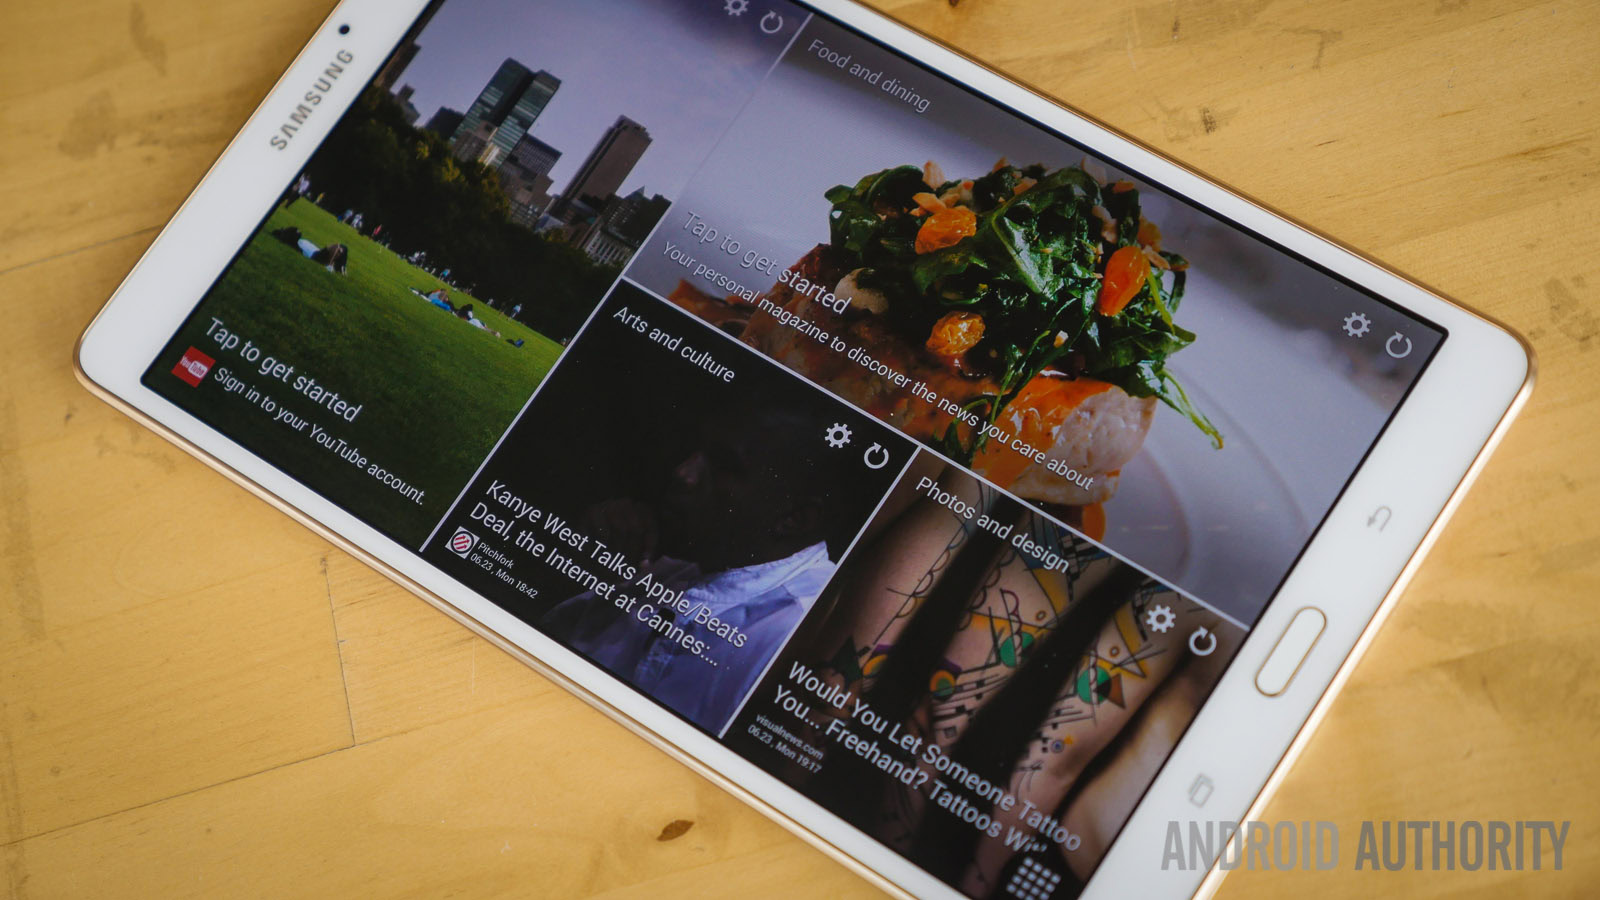 samsung galaxy tab s 8.4 review (13 of 27)